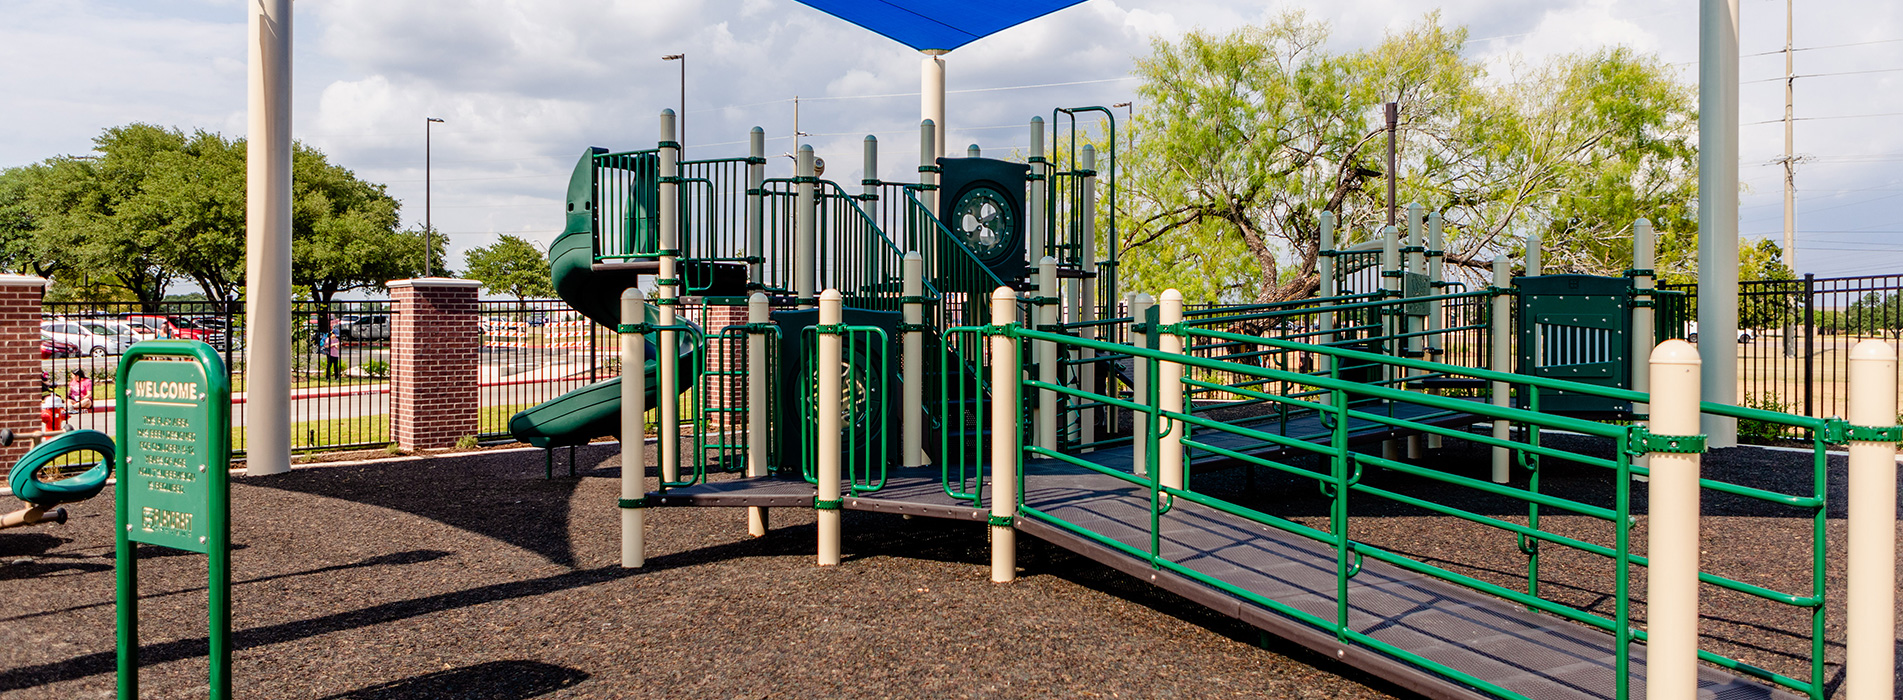 Fun for All Playground - College Station, Texas